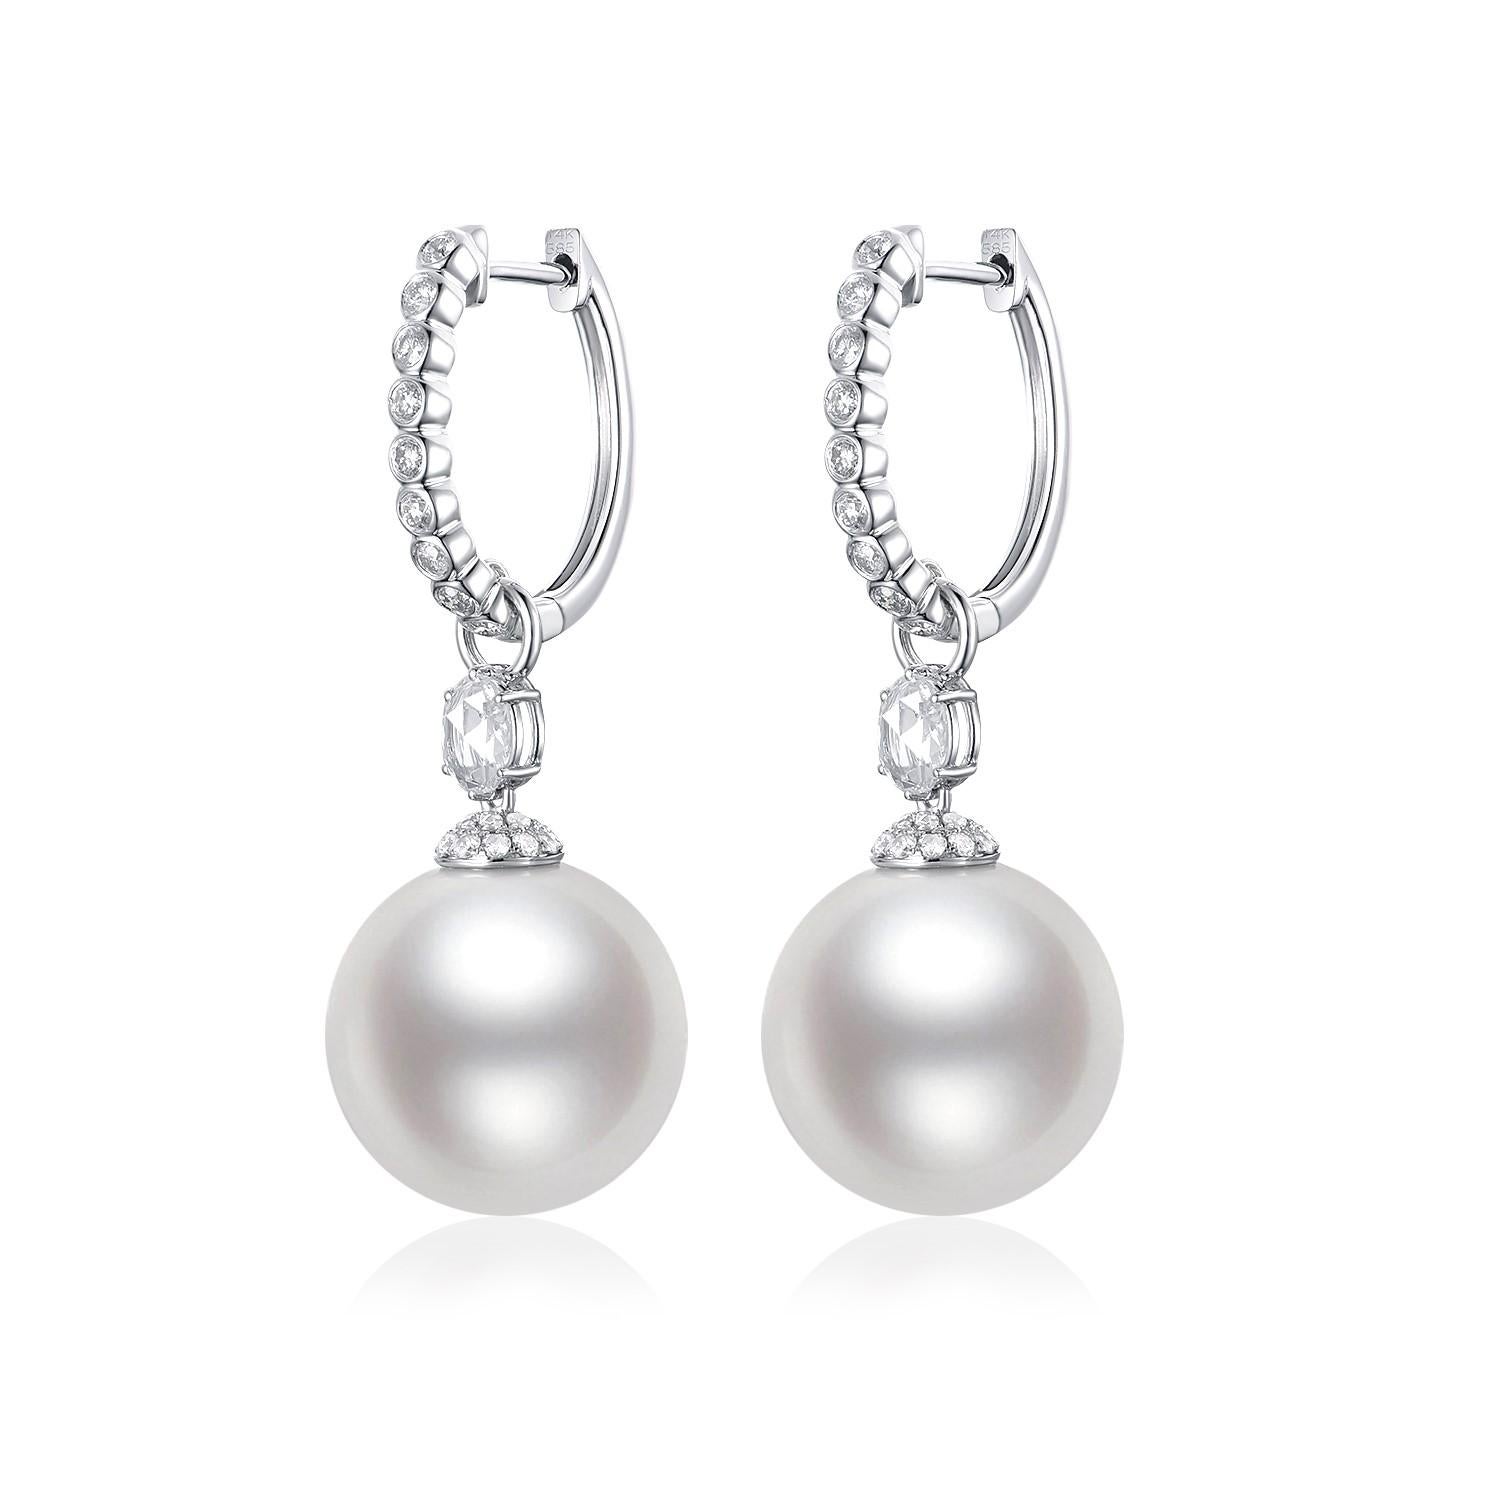 Featured here are elegant drop earrings, beautifully crafted in 14K white gold. Each earring is adorned with a lustrous 13.4mm South Sea pearl, renowned for its size and the warm, natural sheen that radiates sophistication. Above the pearls, rose